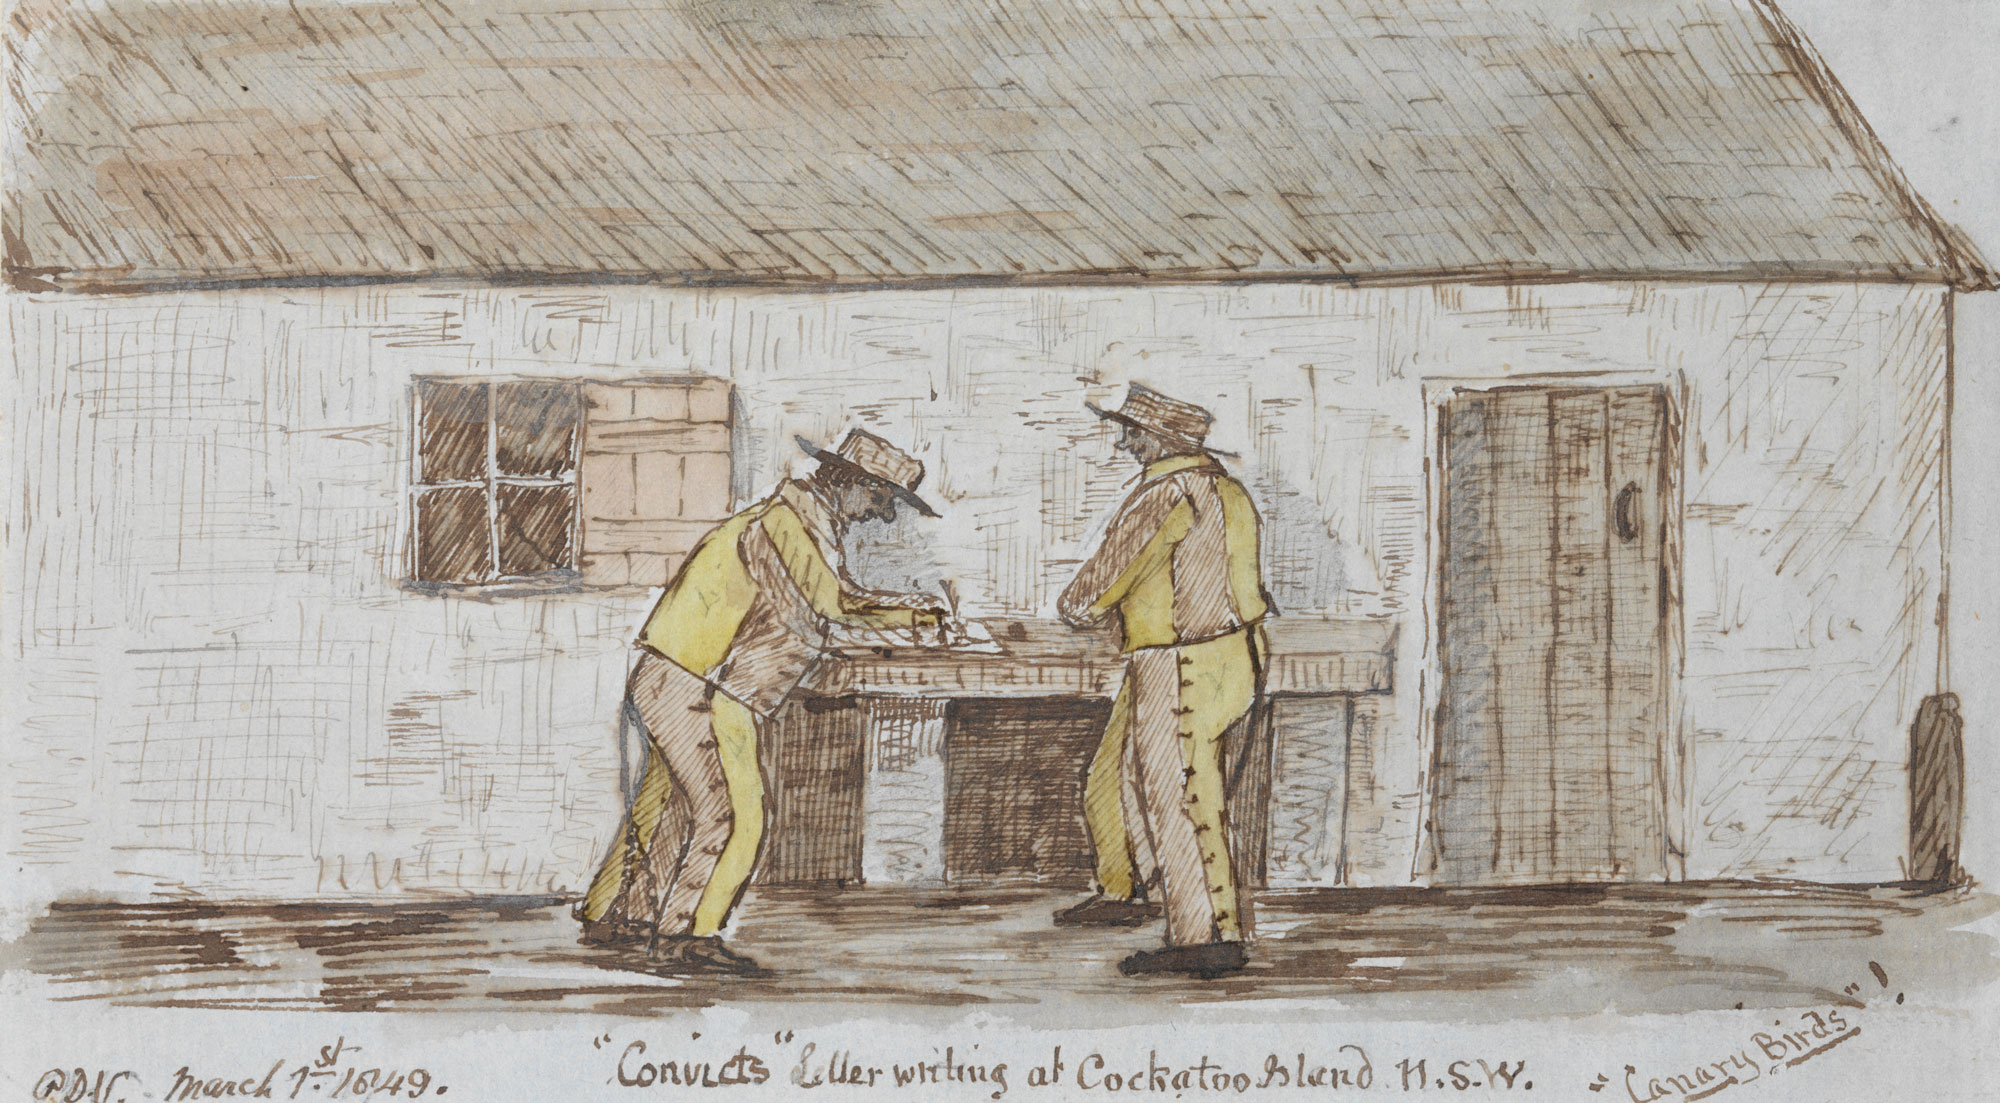 <p>‘Convicts letter writing at Cockatoo Island N.S.W.’, by Philip Doyne Vigors, 1849</p>
